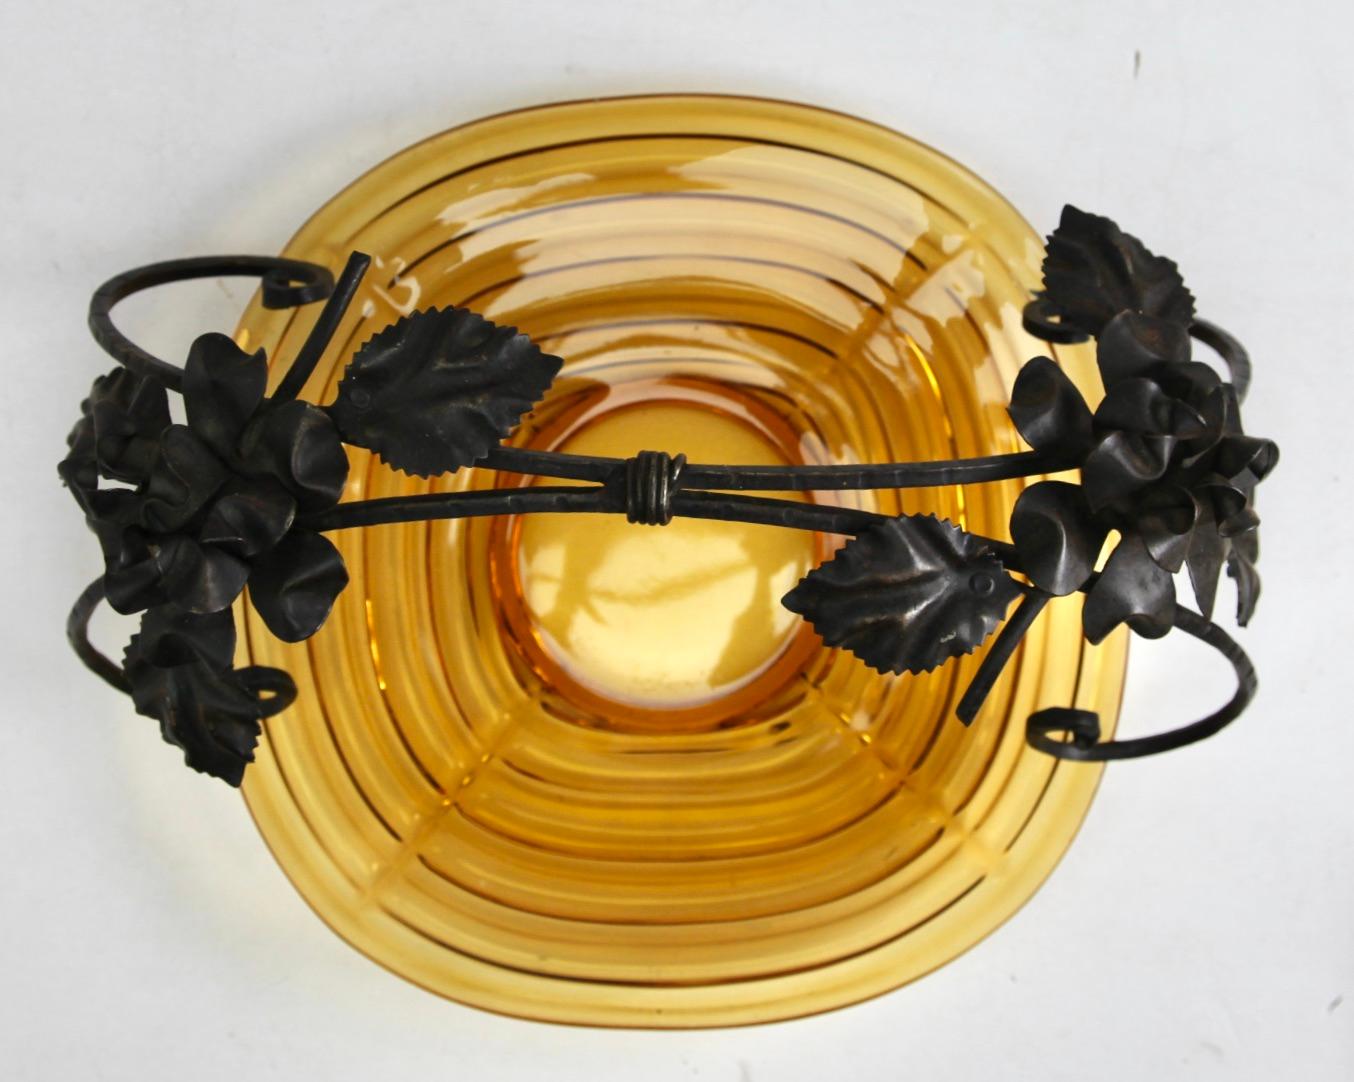 Art Deco Gateau Set, Pressed Glass Dish with Handle/Carrier in Wrought Iron For Sale 2